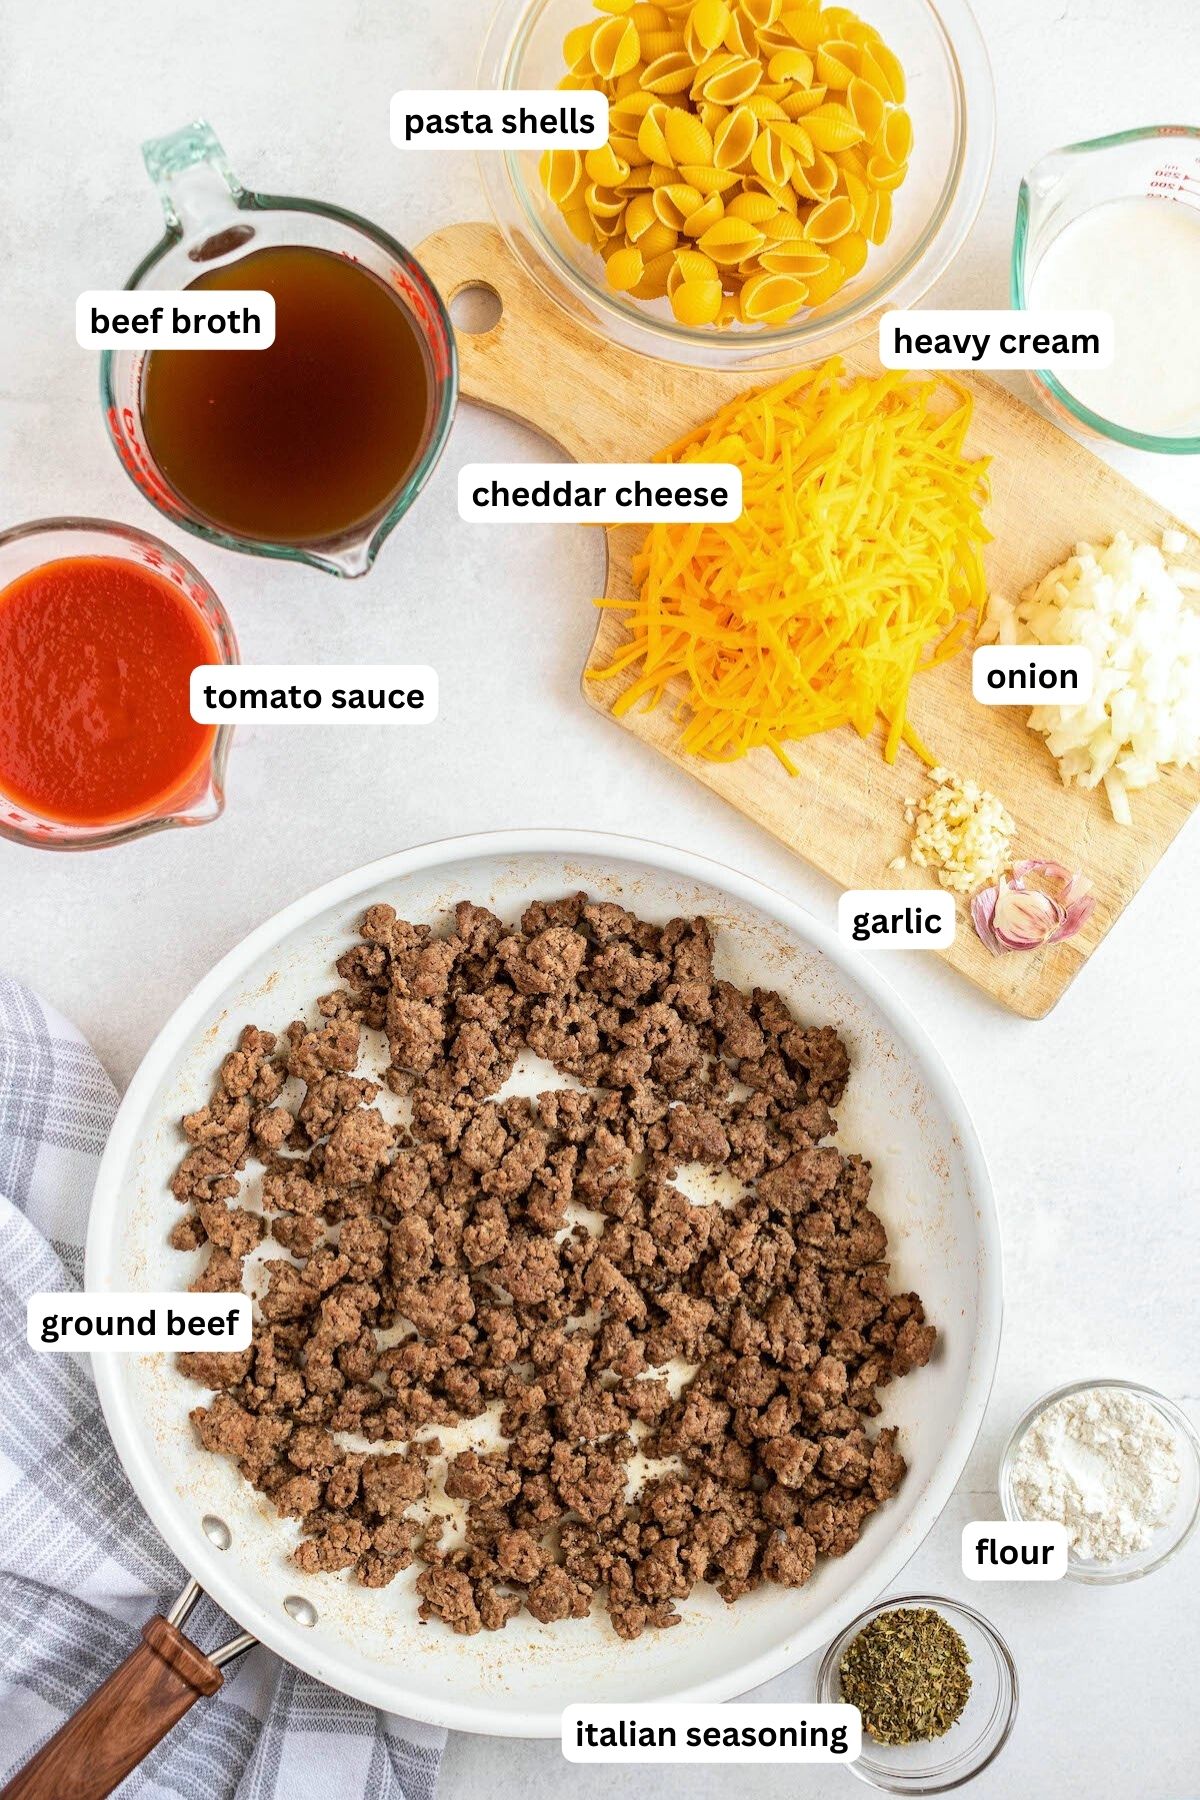 Ingredients arranged in bowls and a skillet for homemade hamburger helper recipe. From top to bottom: pasta shells, beef broth, heavy cream, cheddar cheese, tomato broth, onion, garlic, ground beef, flour and Italian seasoning.